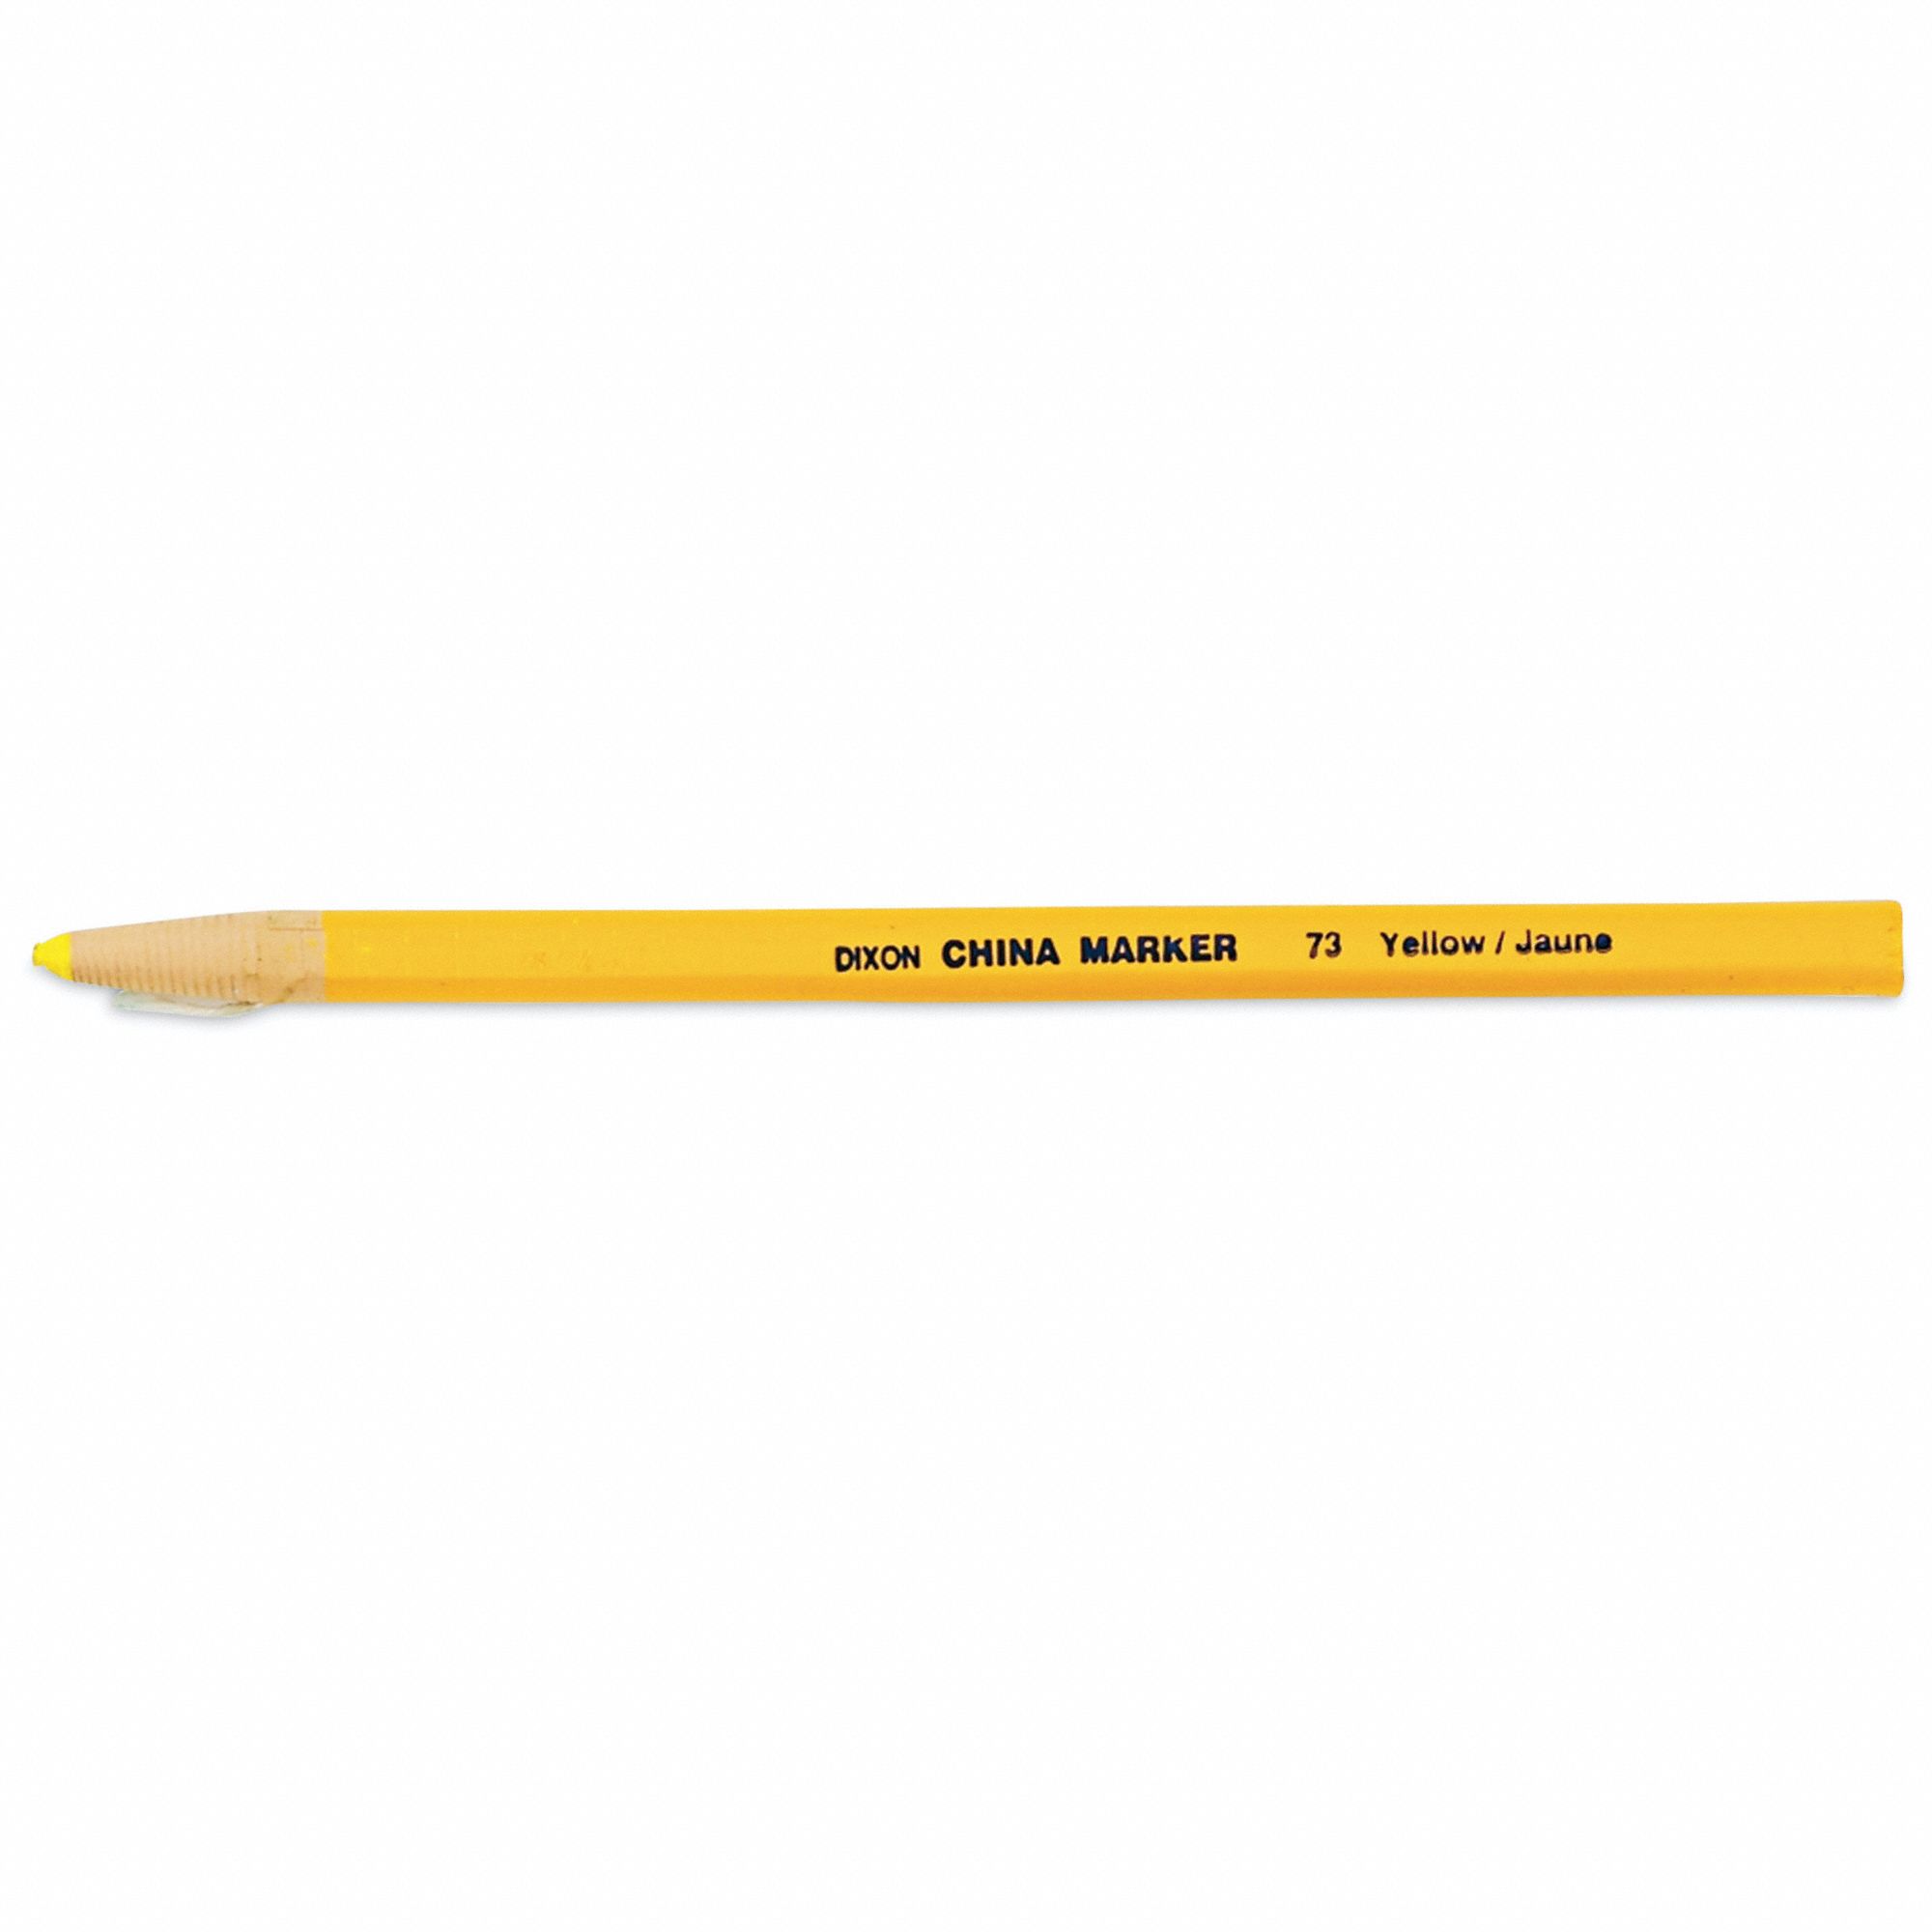 China Marker: Grease Pencil, 1/4 in Tip Wd, Bullet, Yellow, Wax, Not Refillable, Yellow, 12 PK